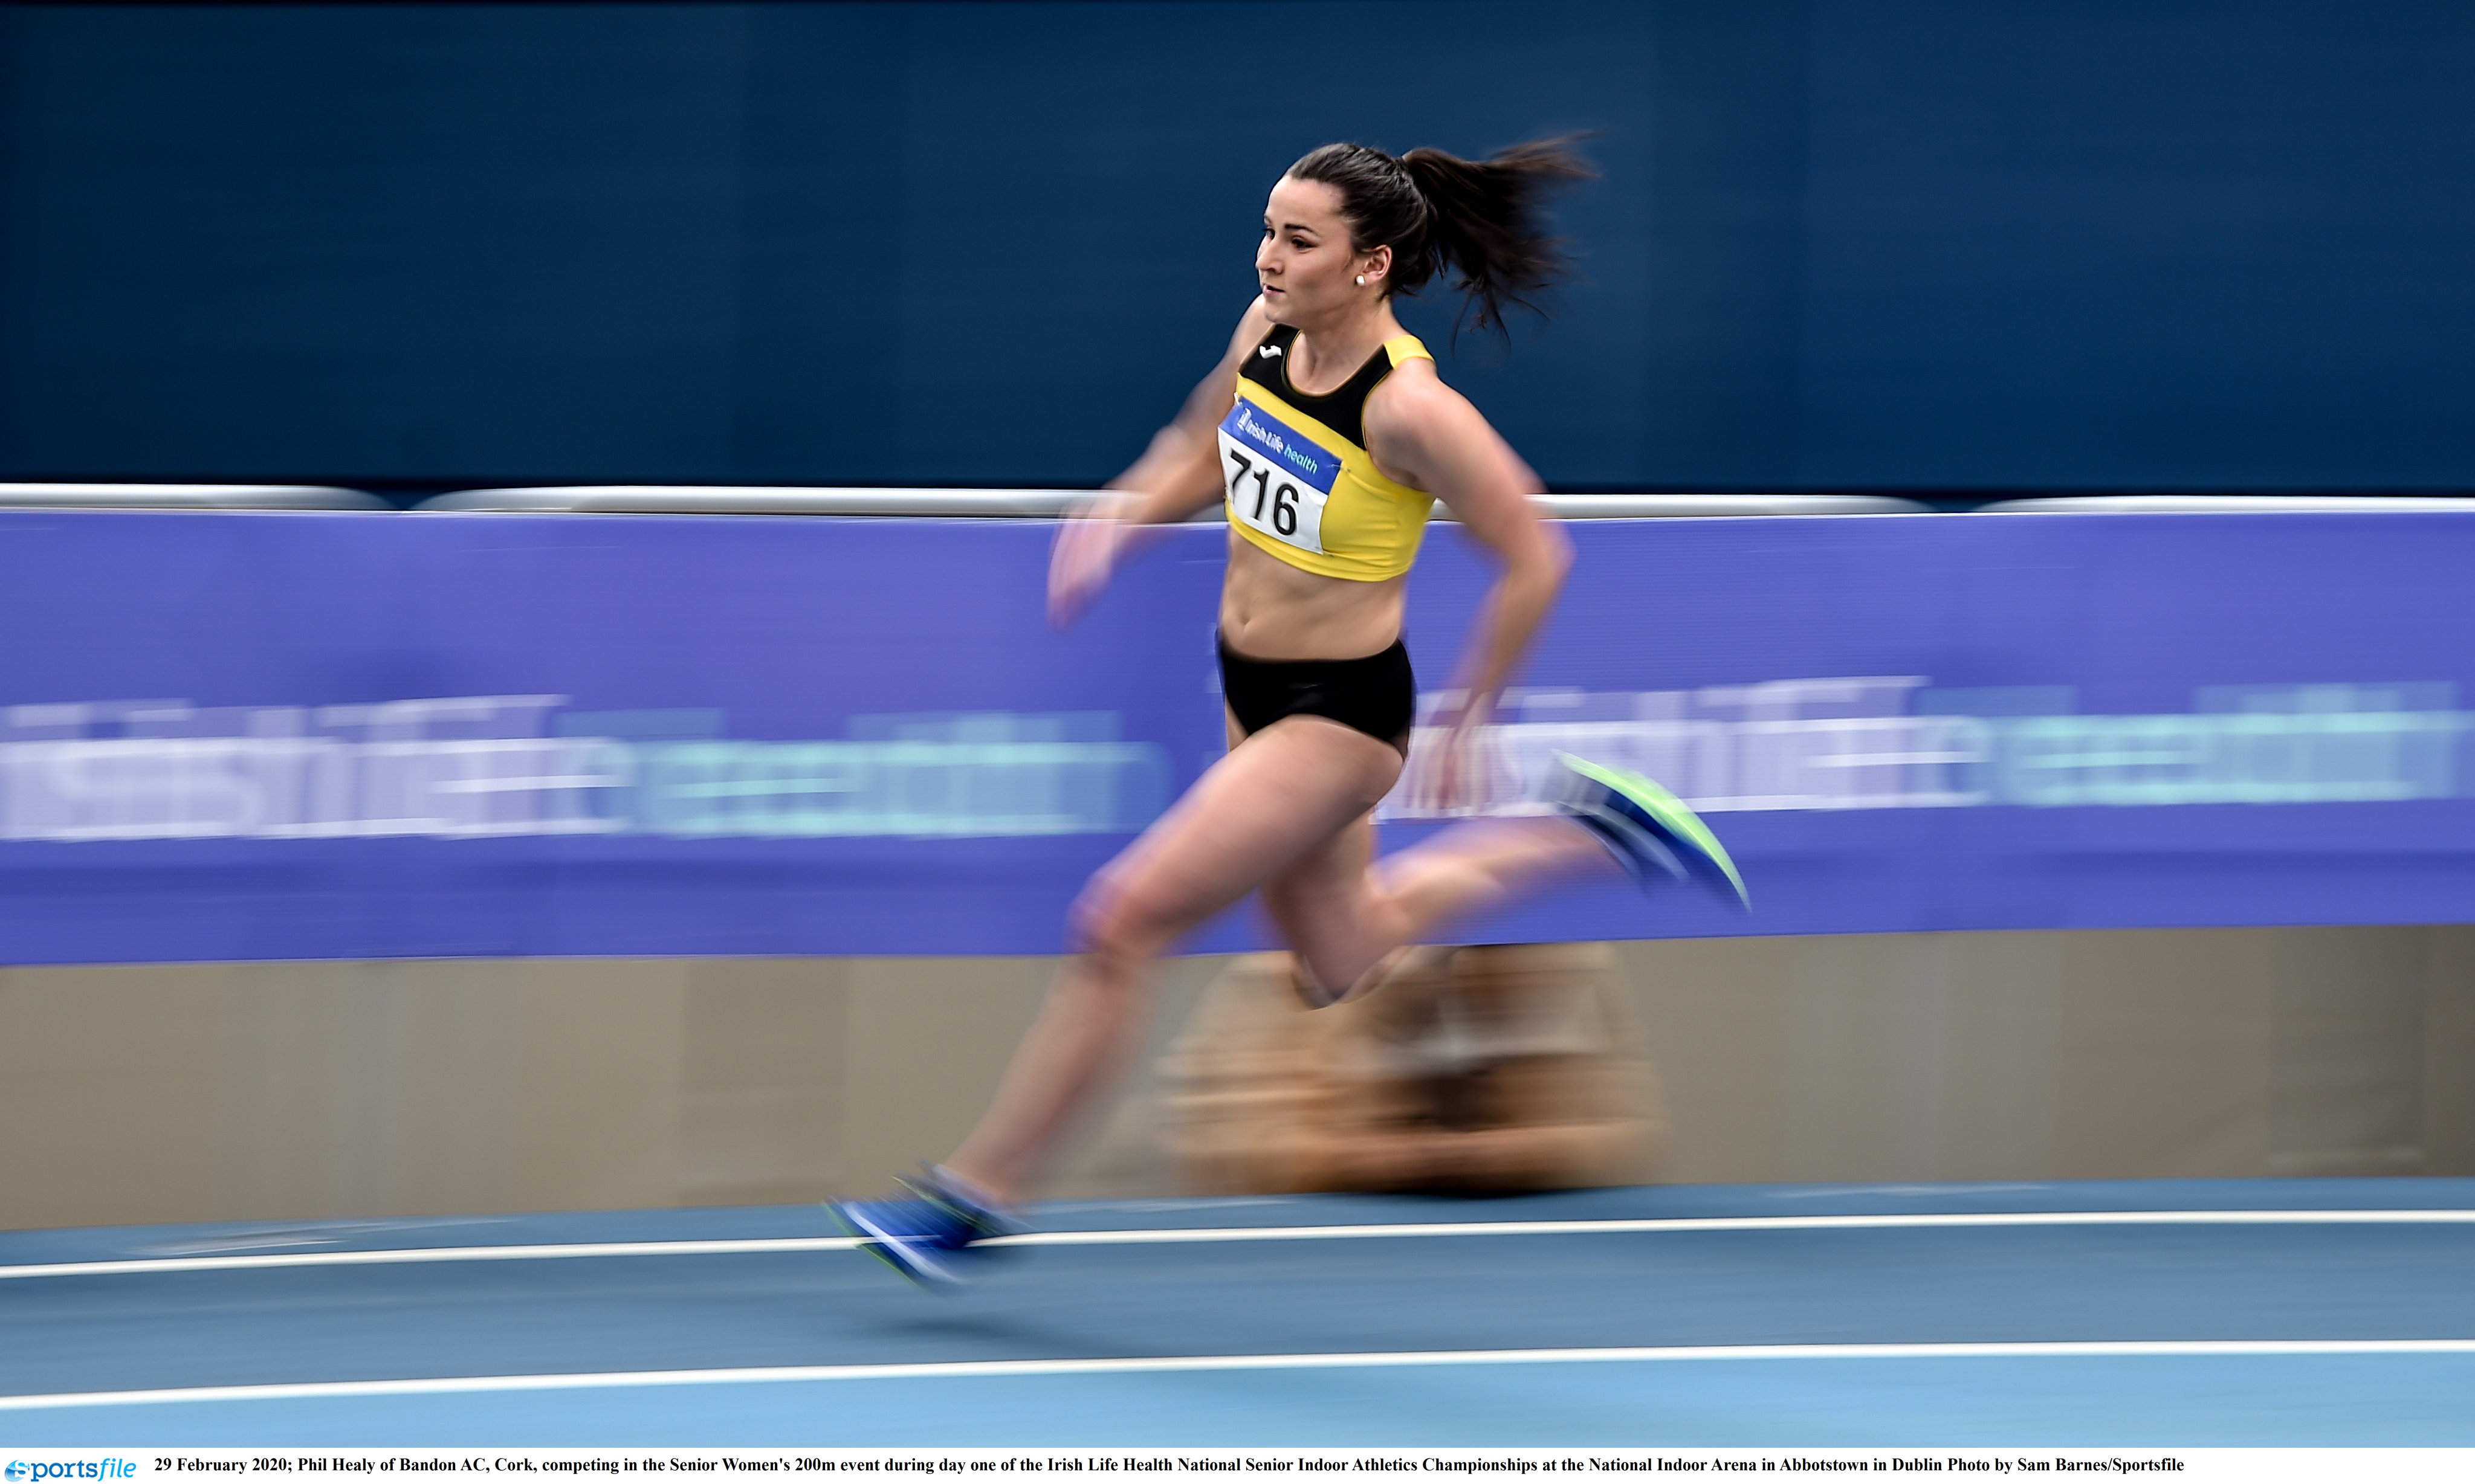 Healy whirs to 200m championship record on day 1